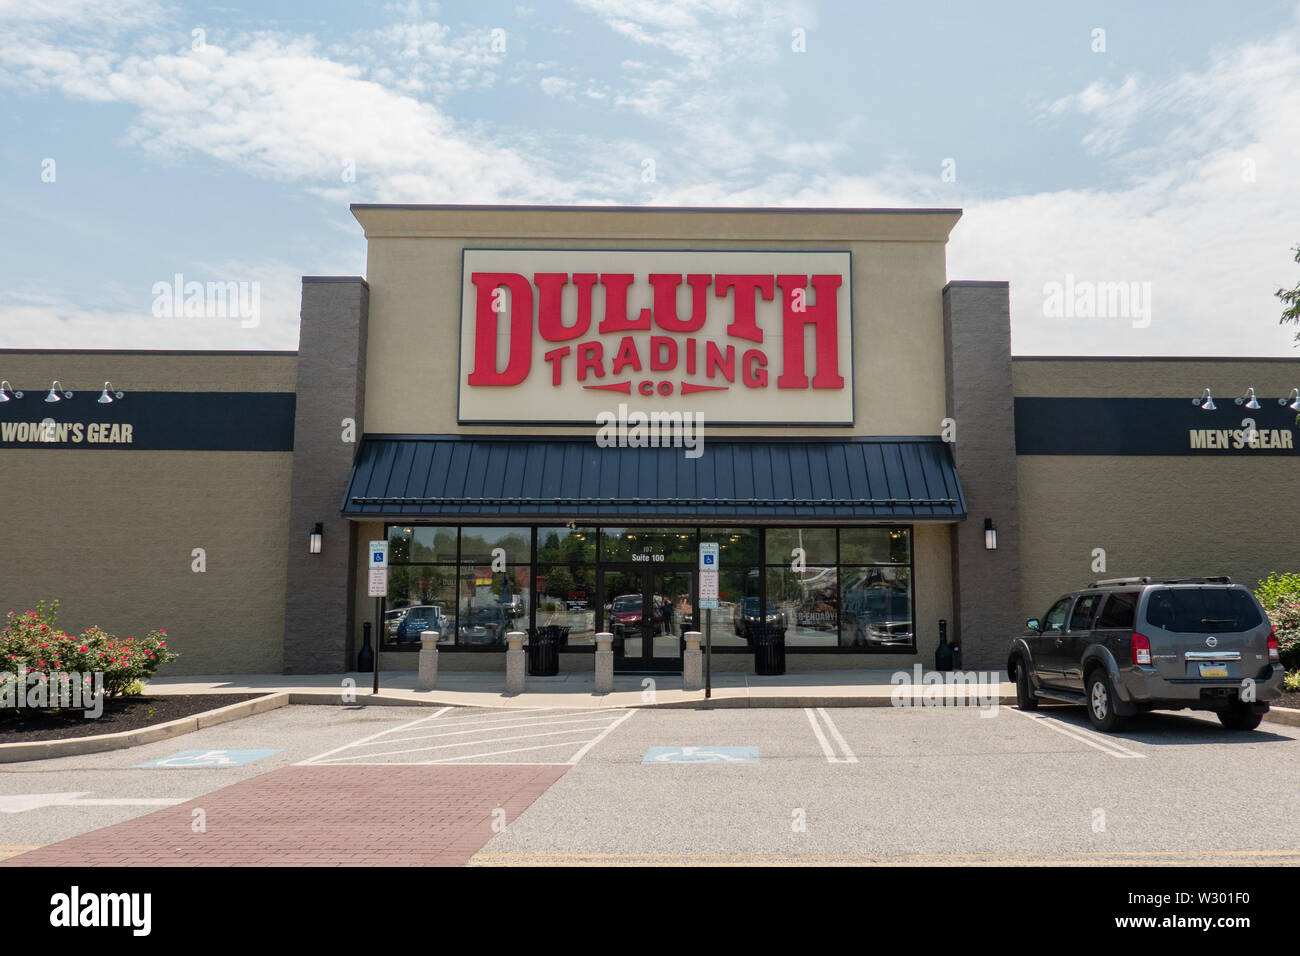 King of Prussia, PA - July 2, 2019: Duluth Trading Company retail